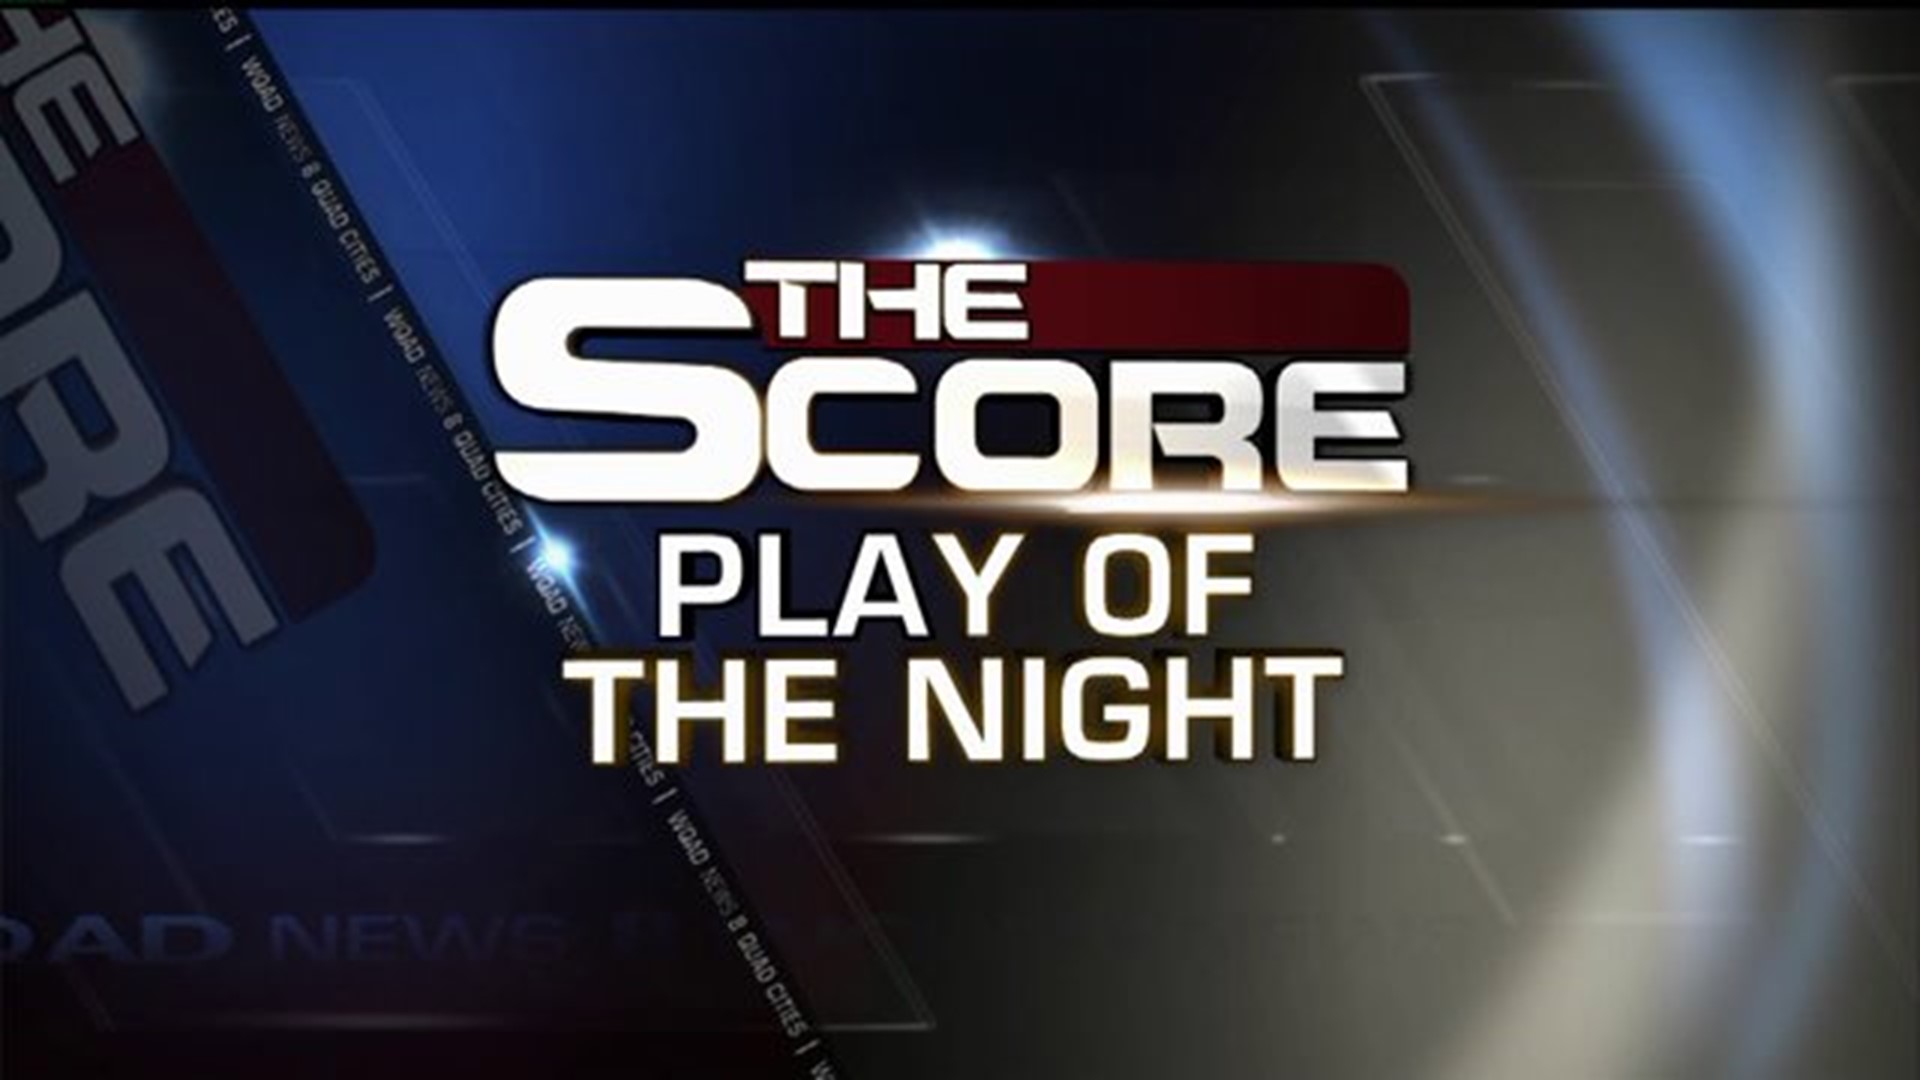 The Score- Play Of the Night